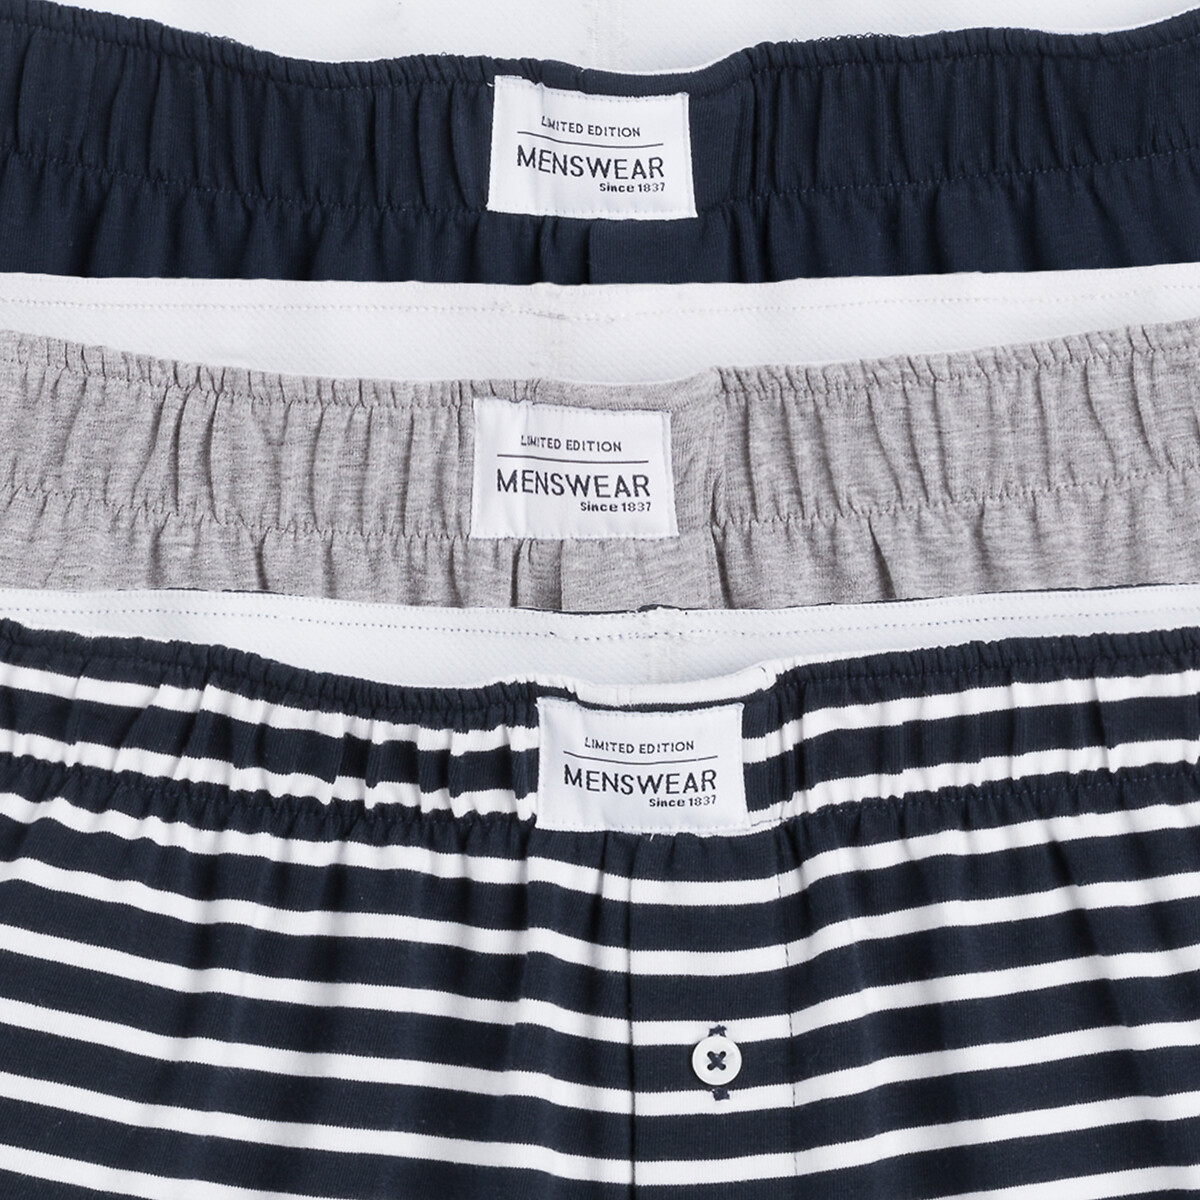 AND1 Men's Underwear - Classic Knit Boxers (6 Pack), Size Medium,  Blue/Black/Red/Grey at  Men's Clothing store